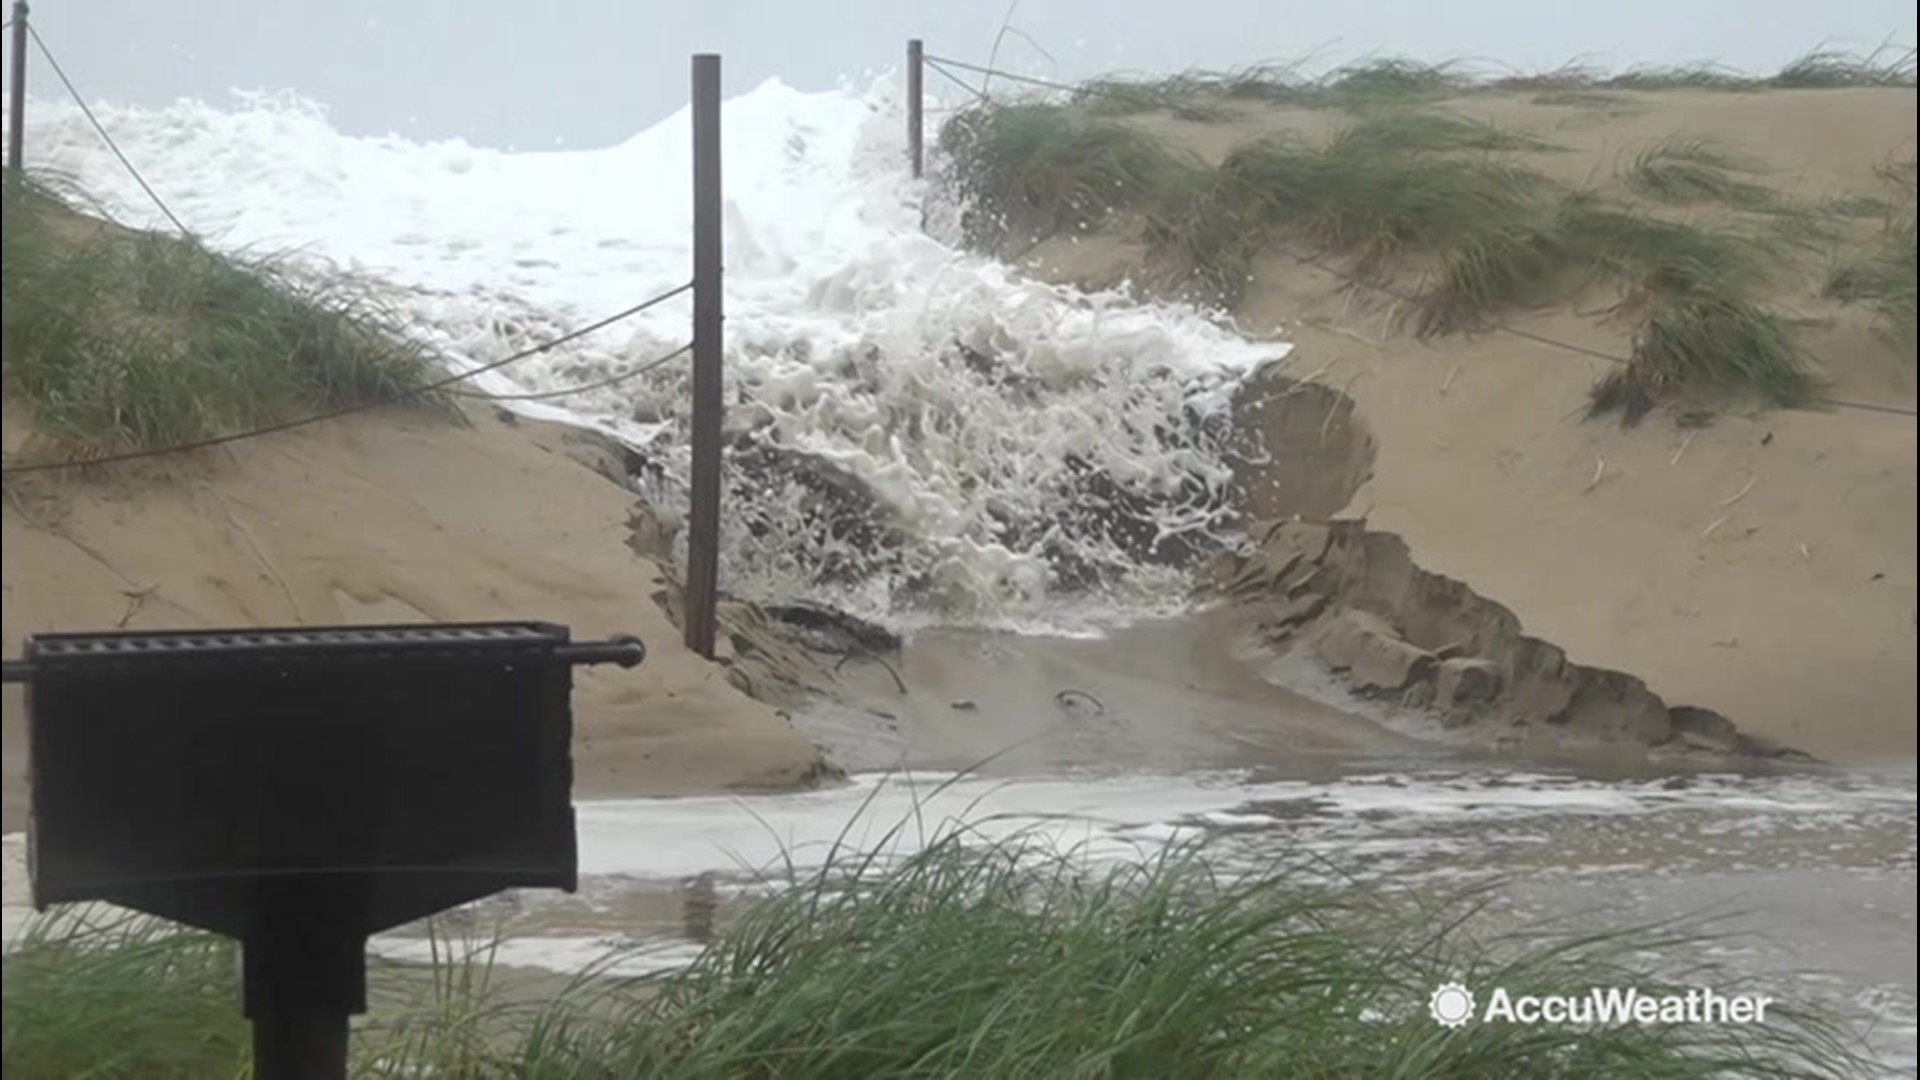 A blustery and wicked nor'easter hit North Carolina this weekend, bringing high winds and fierce waves. As you can see from this video, the waves overpowered the dunes that sat seaside.